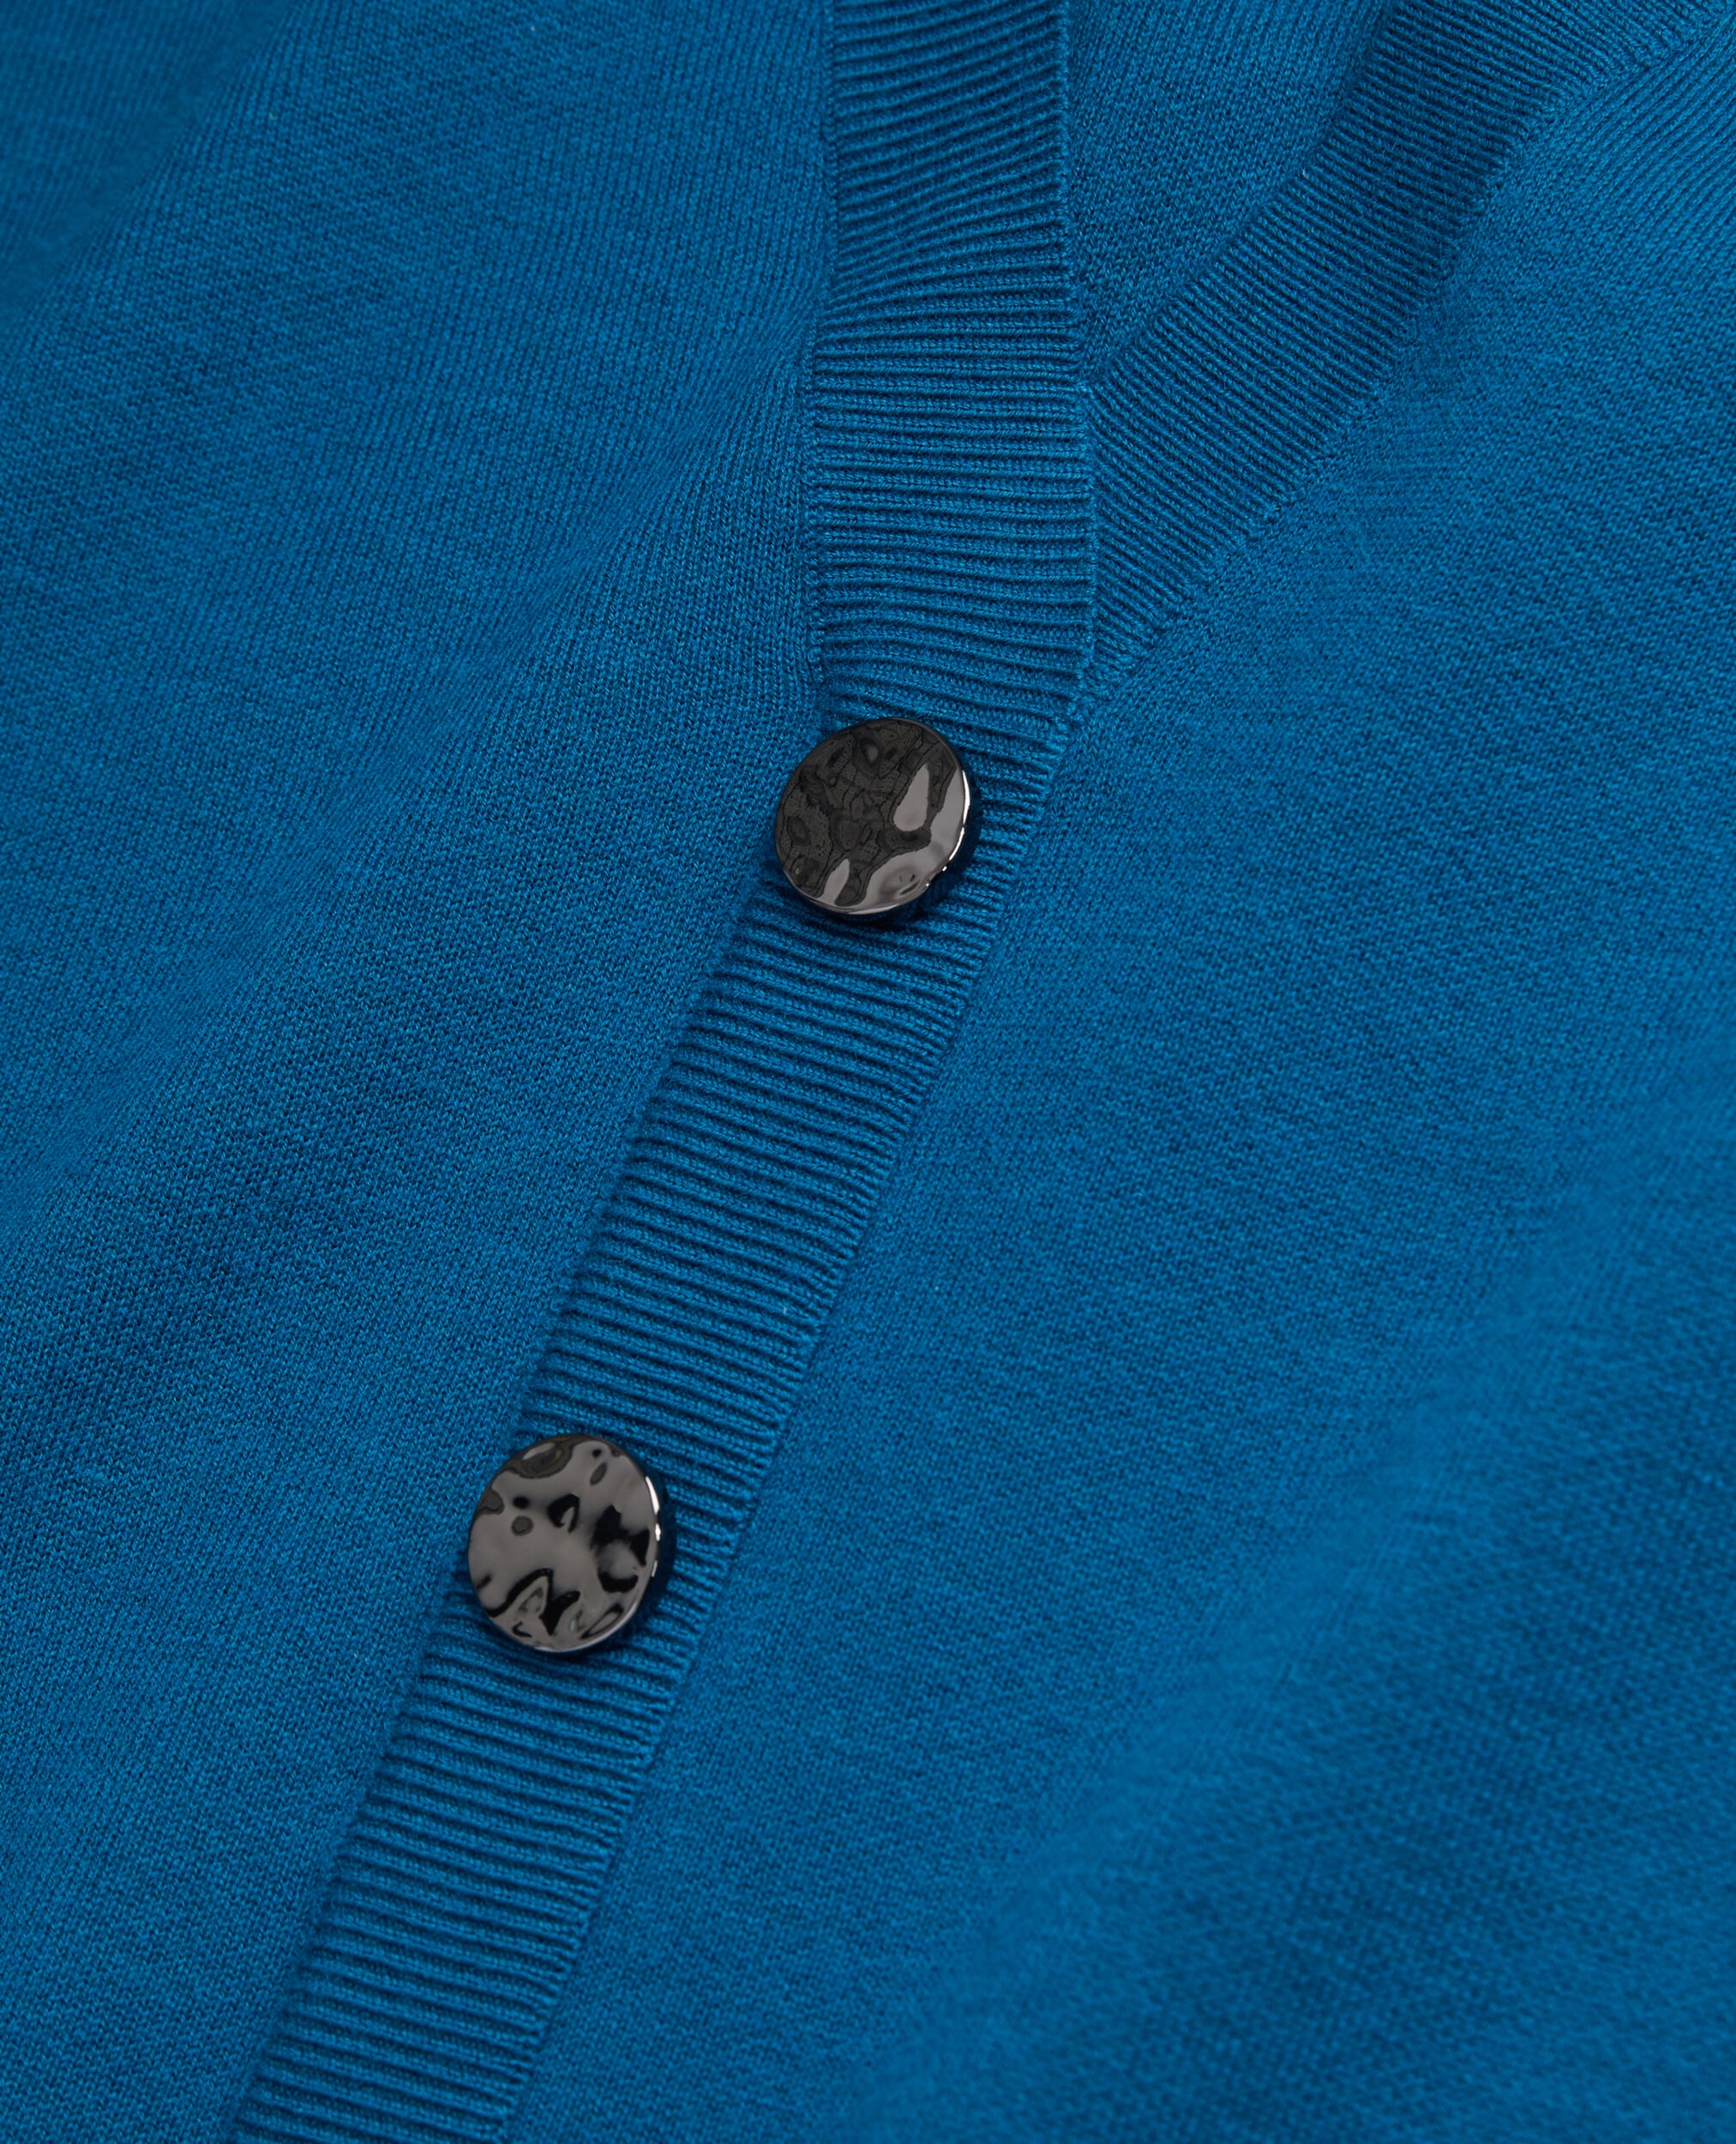 Blue sweater with buttoning on the back, MEDIUM BLUE, hi-res image number null